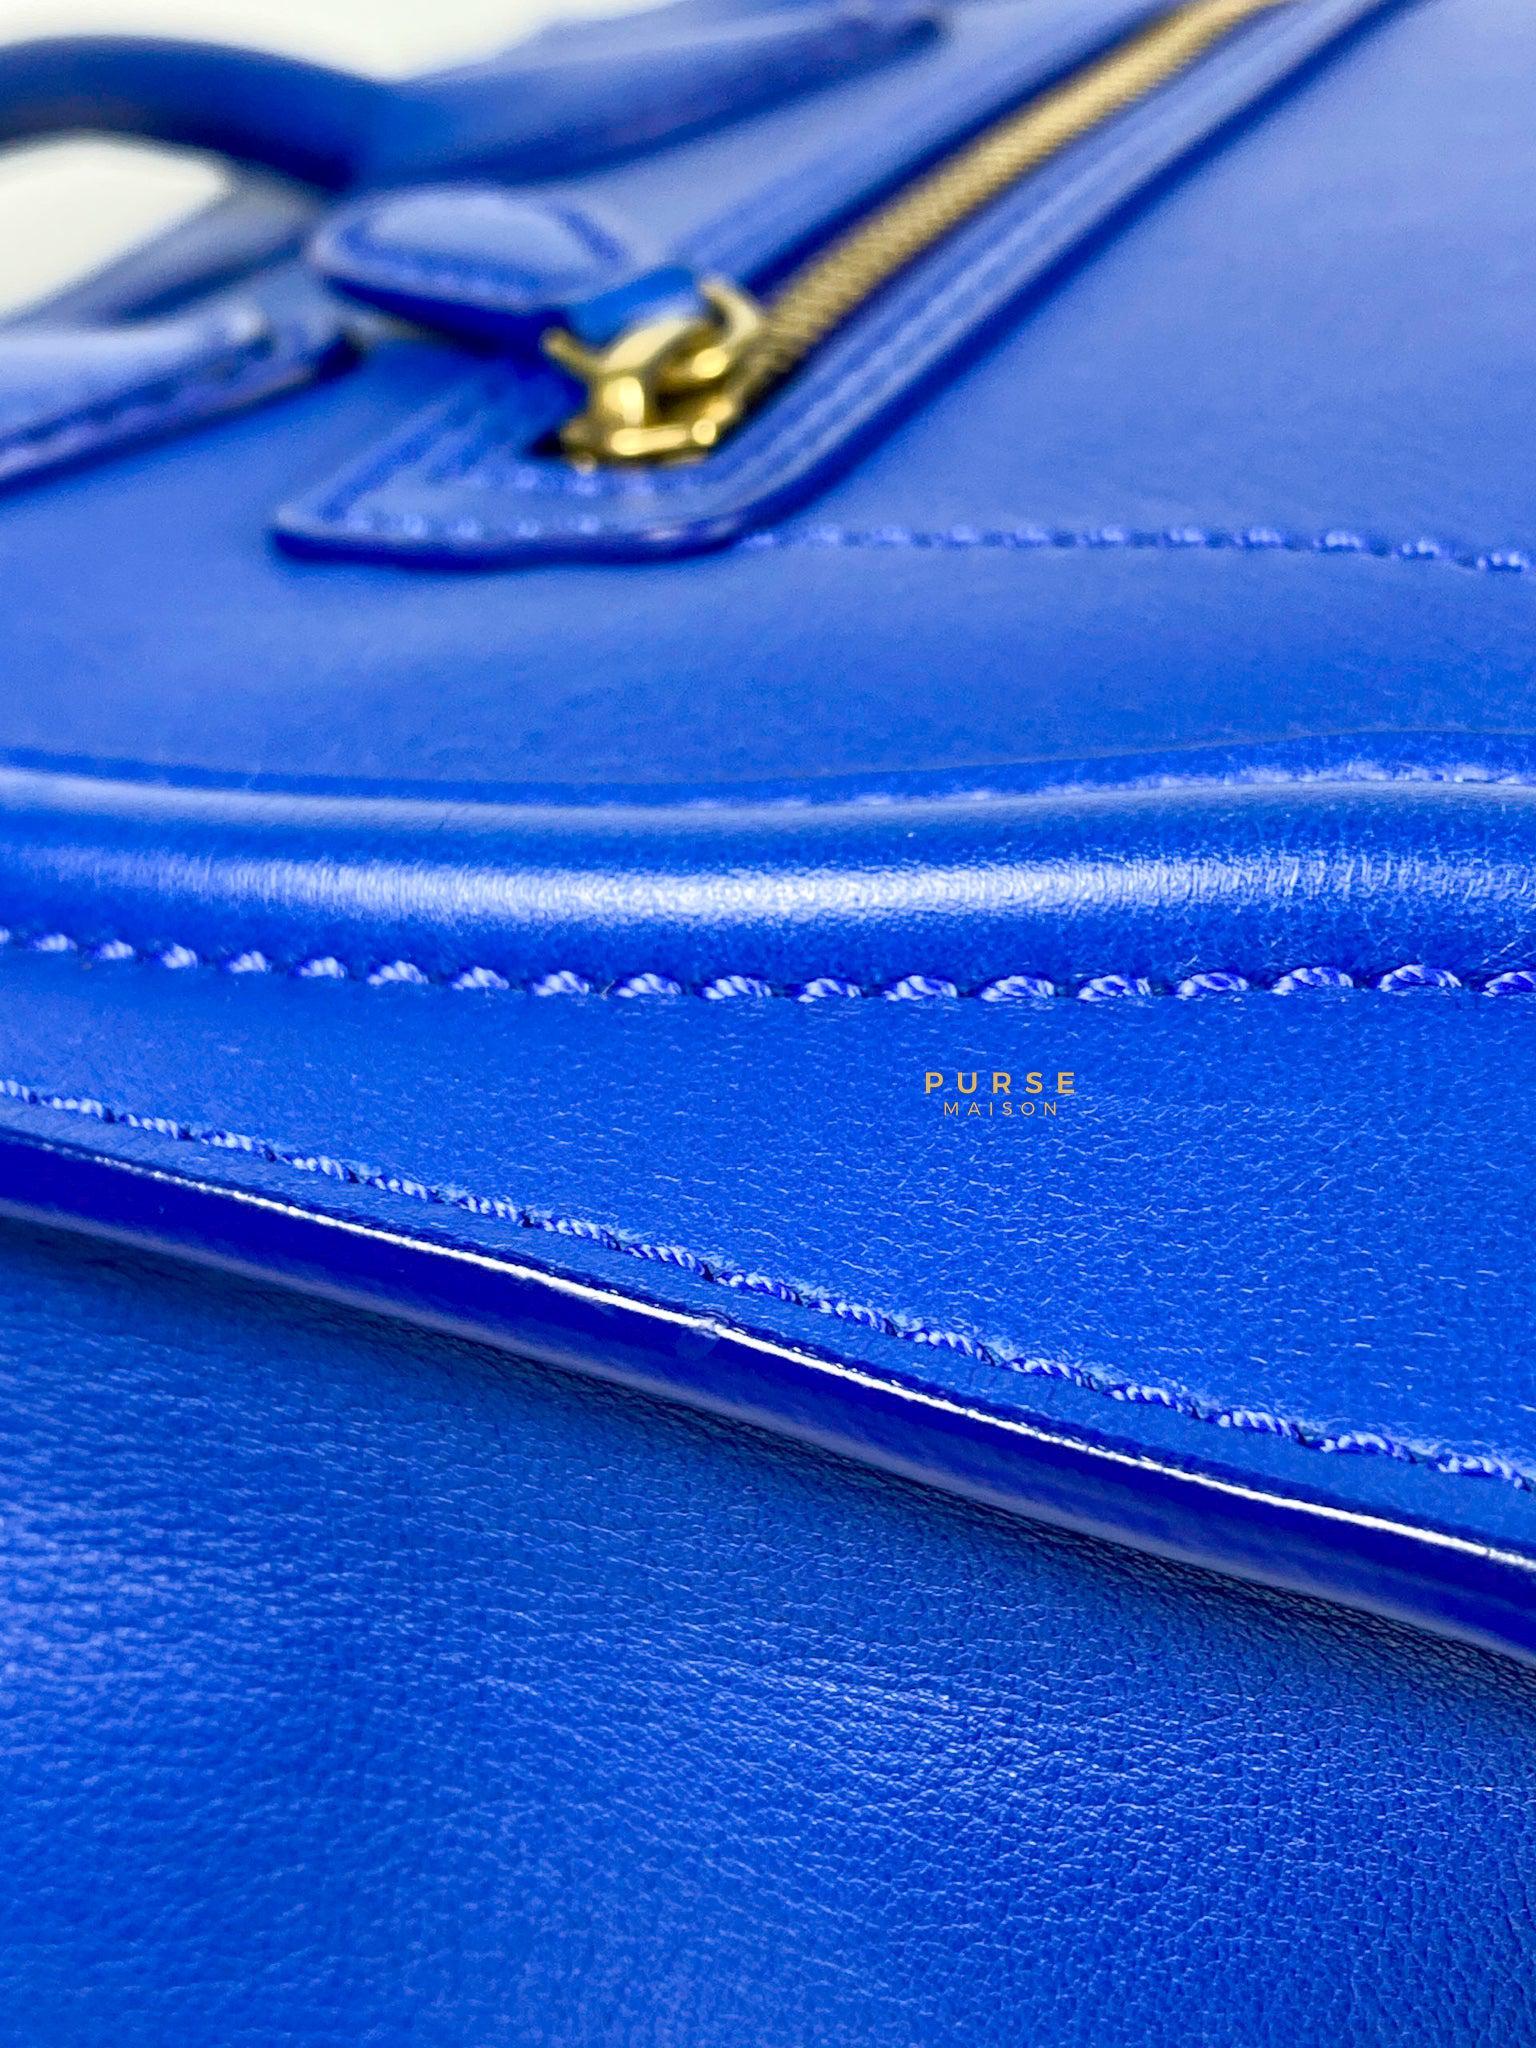 Celine Royal Blue Smooth Calfskin Leather Micro Luggage Tote Bag